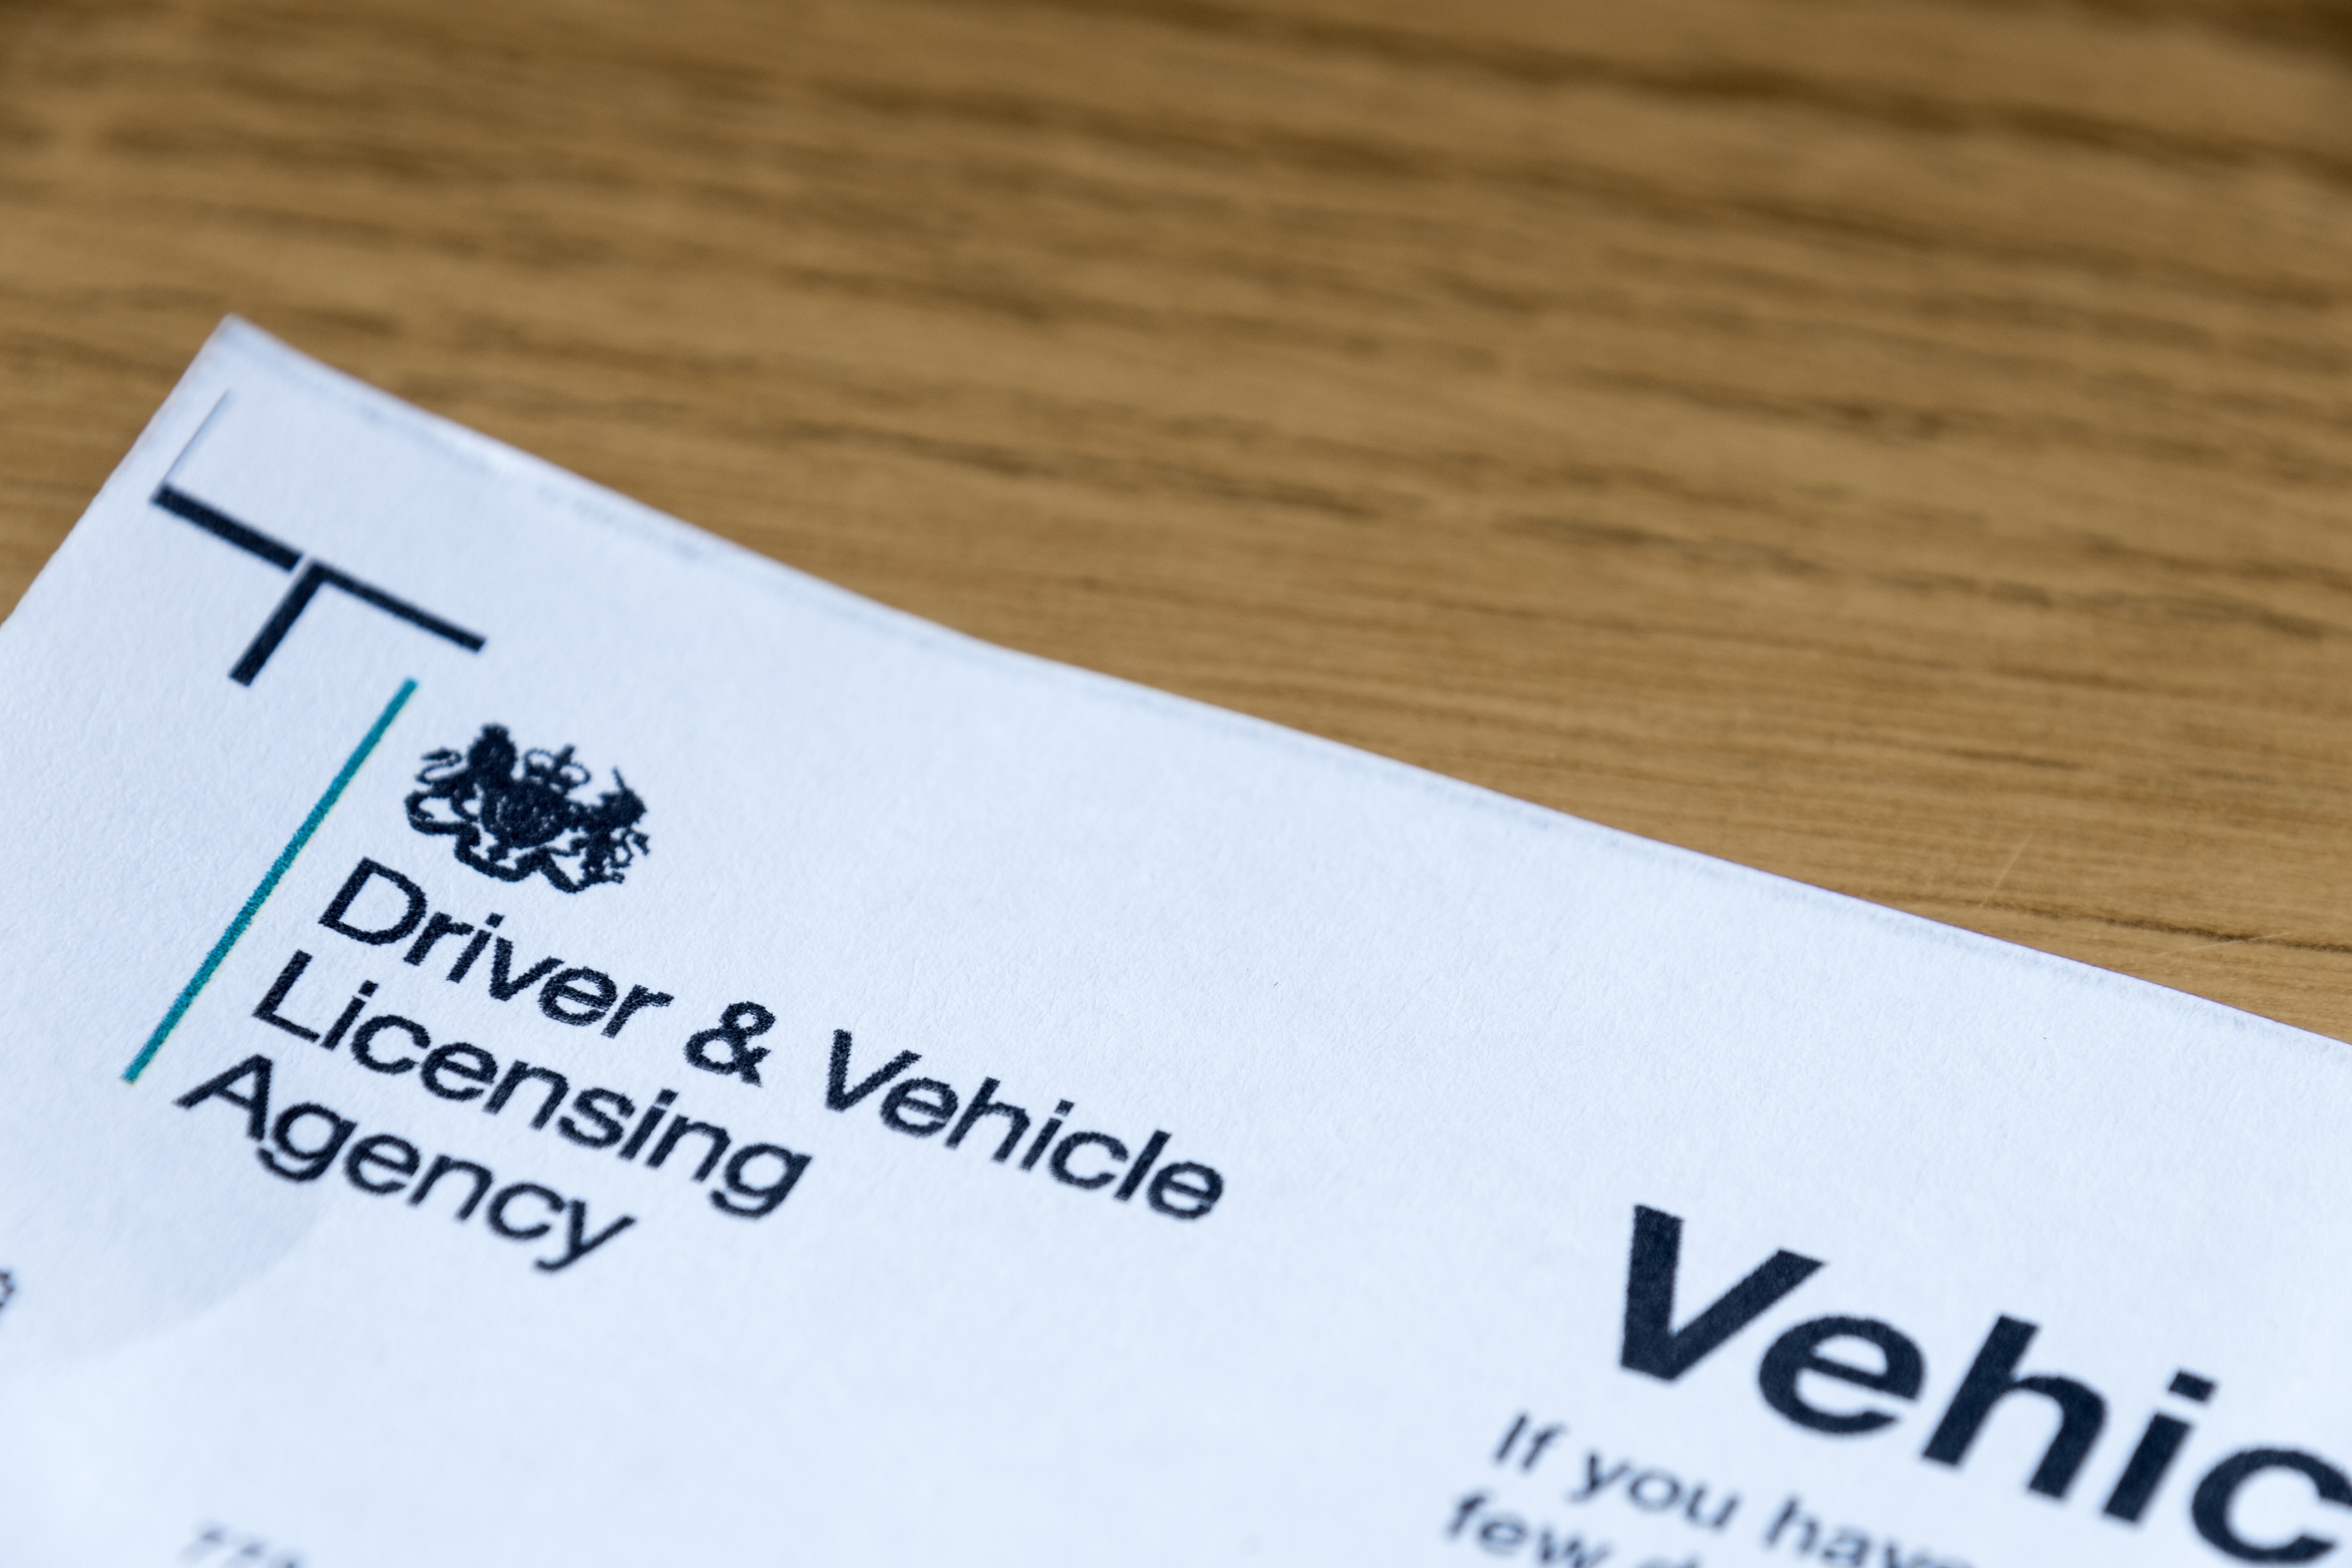 Government launches independent review of DVLA